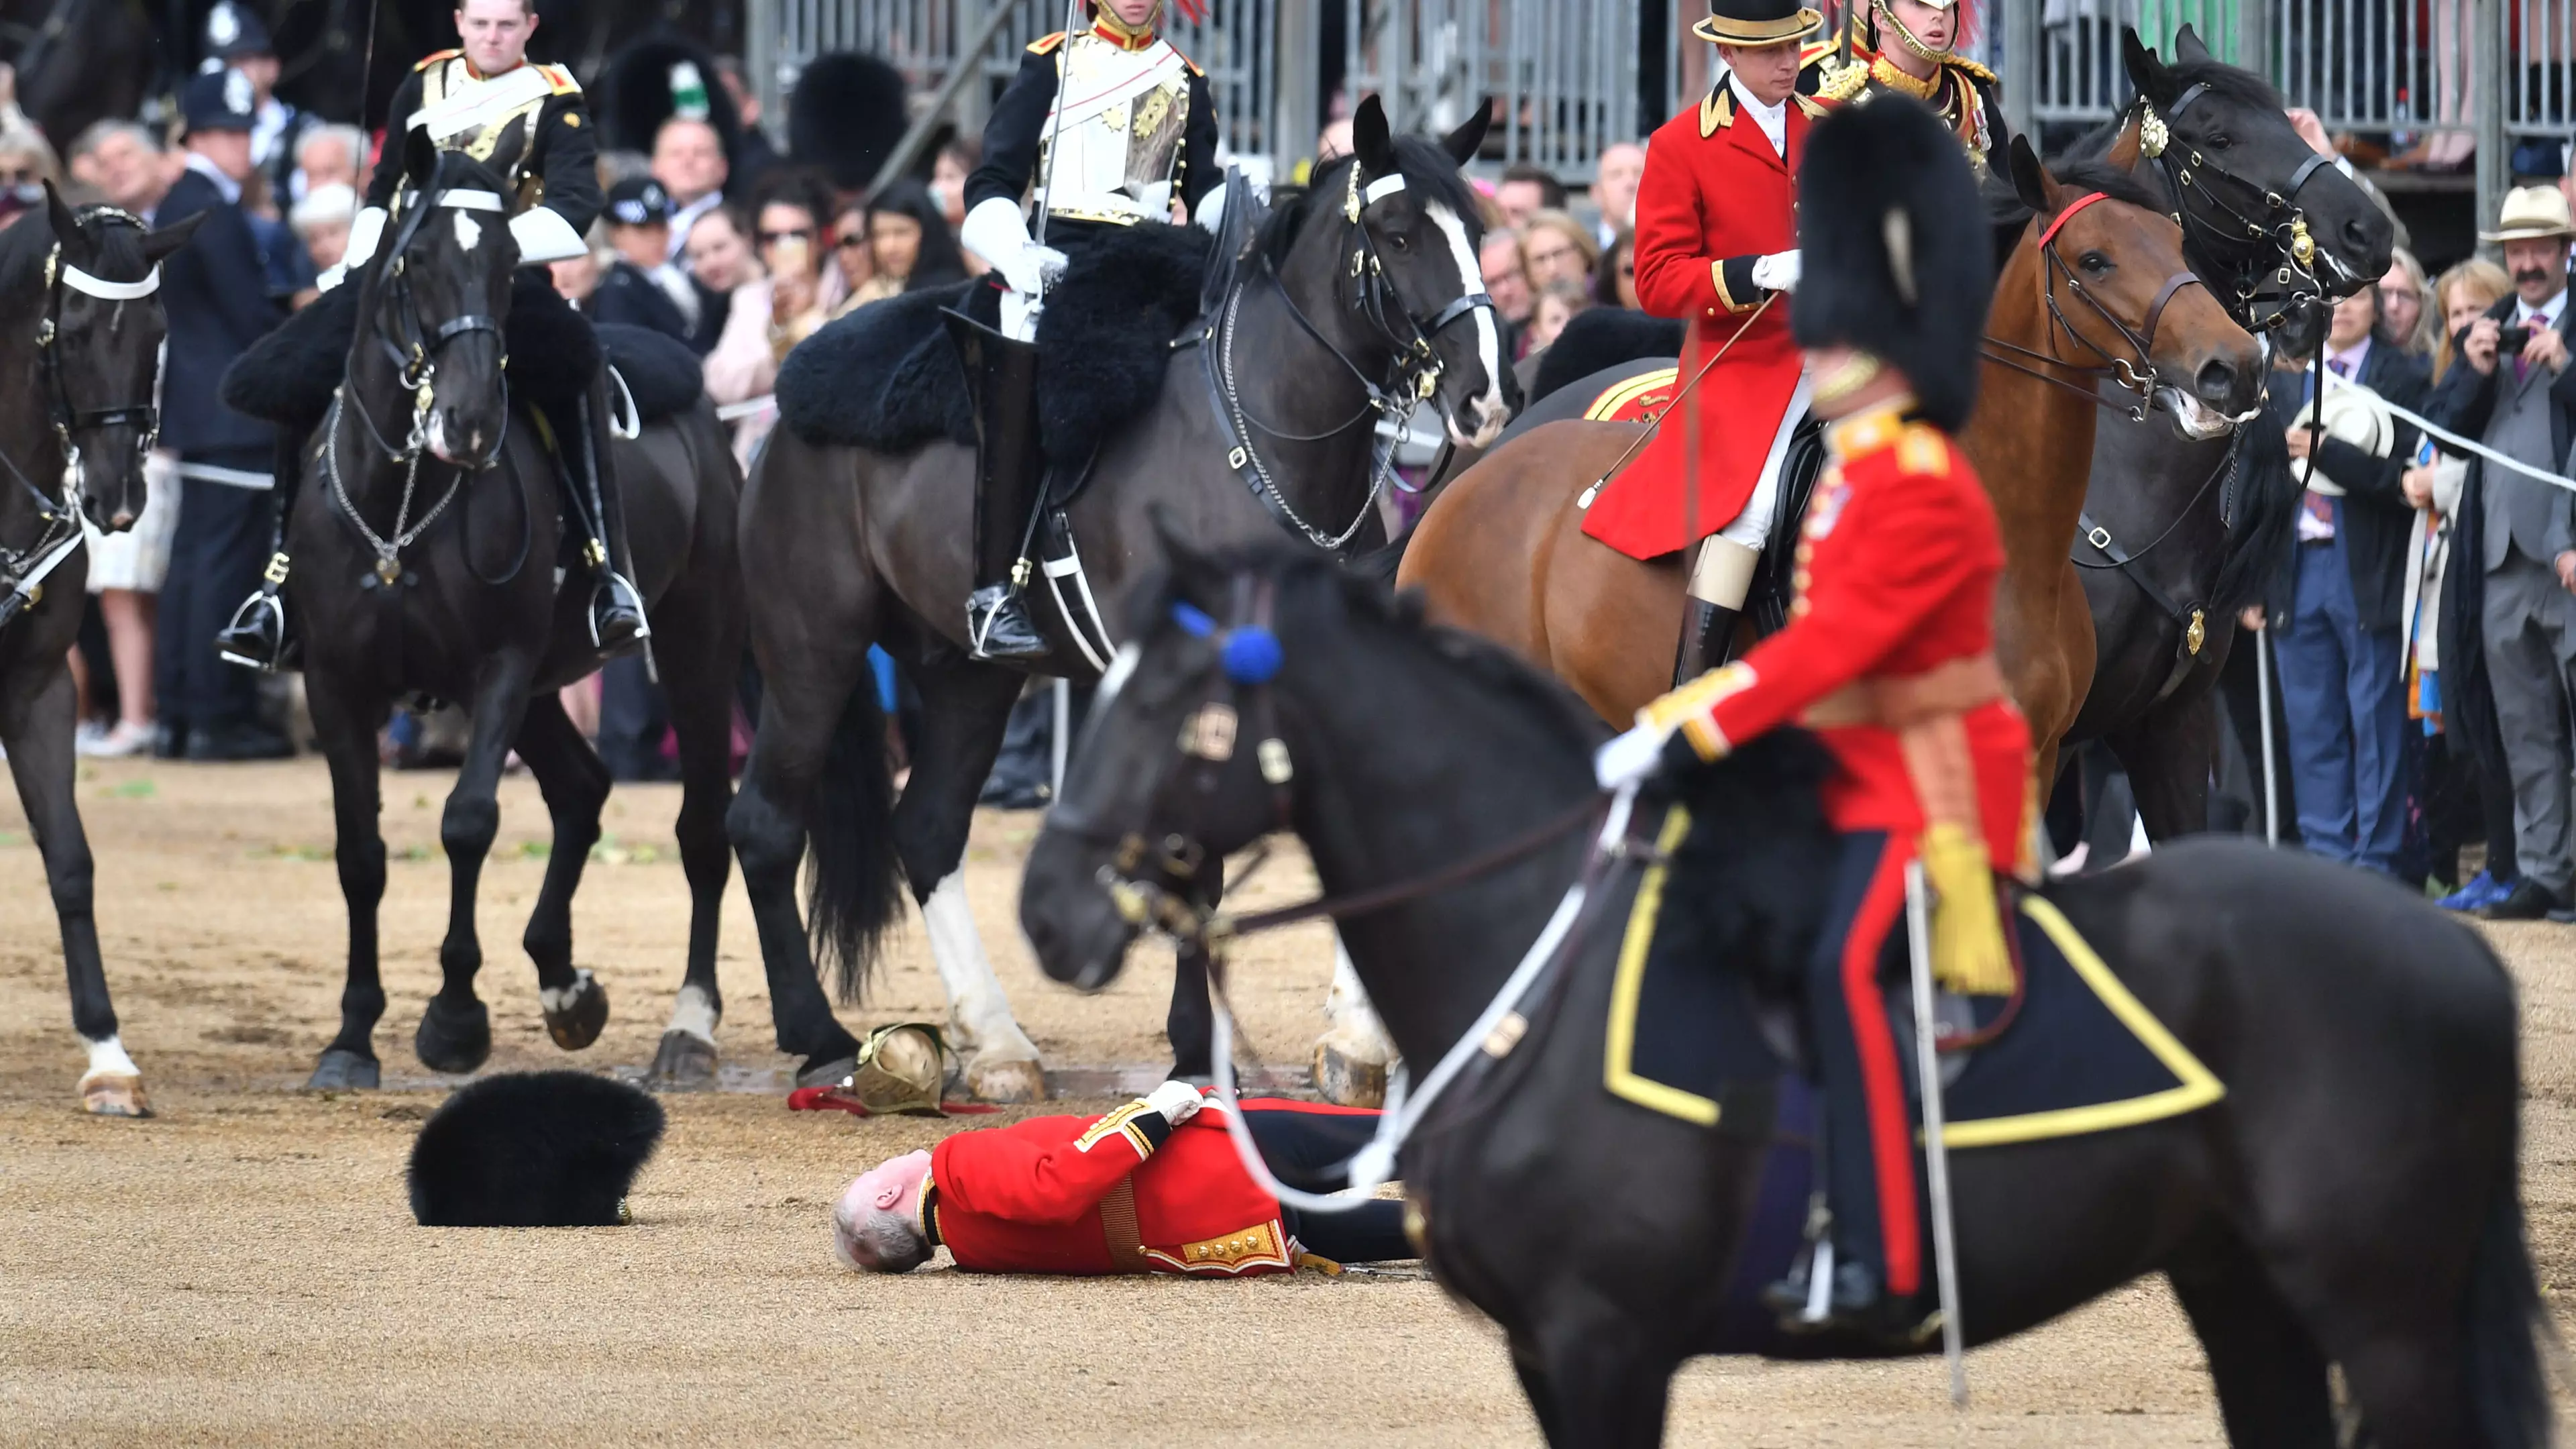 Soldier Thrown From Horse During Queen's Birthday Celebrations